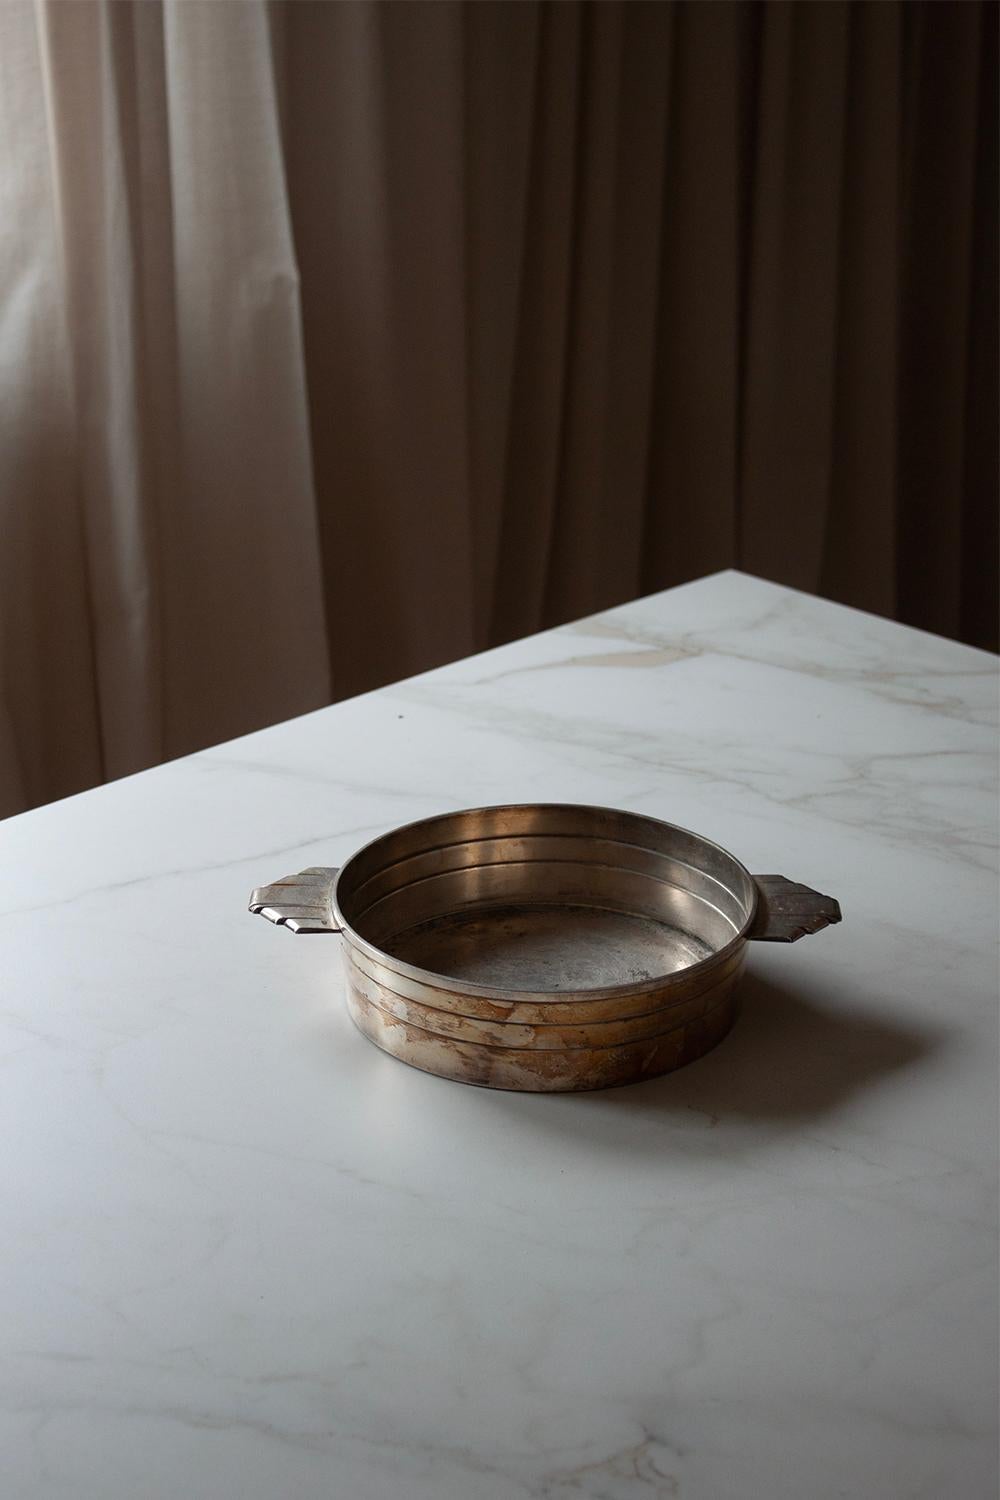 Looking back at the 1920s this little silver plated vessel is a wonderful representation of the art deco period. This silver plated bowl or plater is decorated with strong shapes at the Handels, while the rest is keep minimal and simple. This art